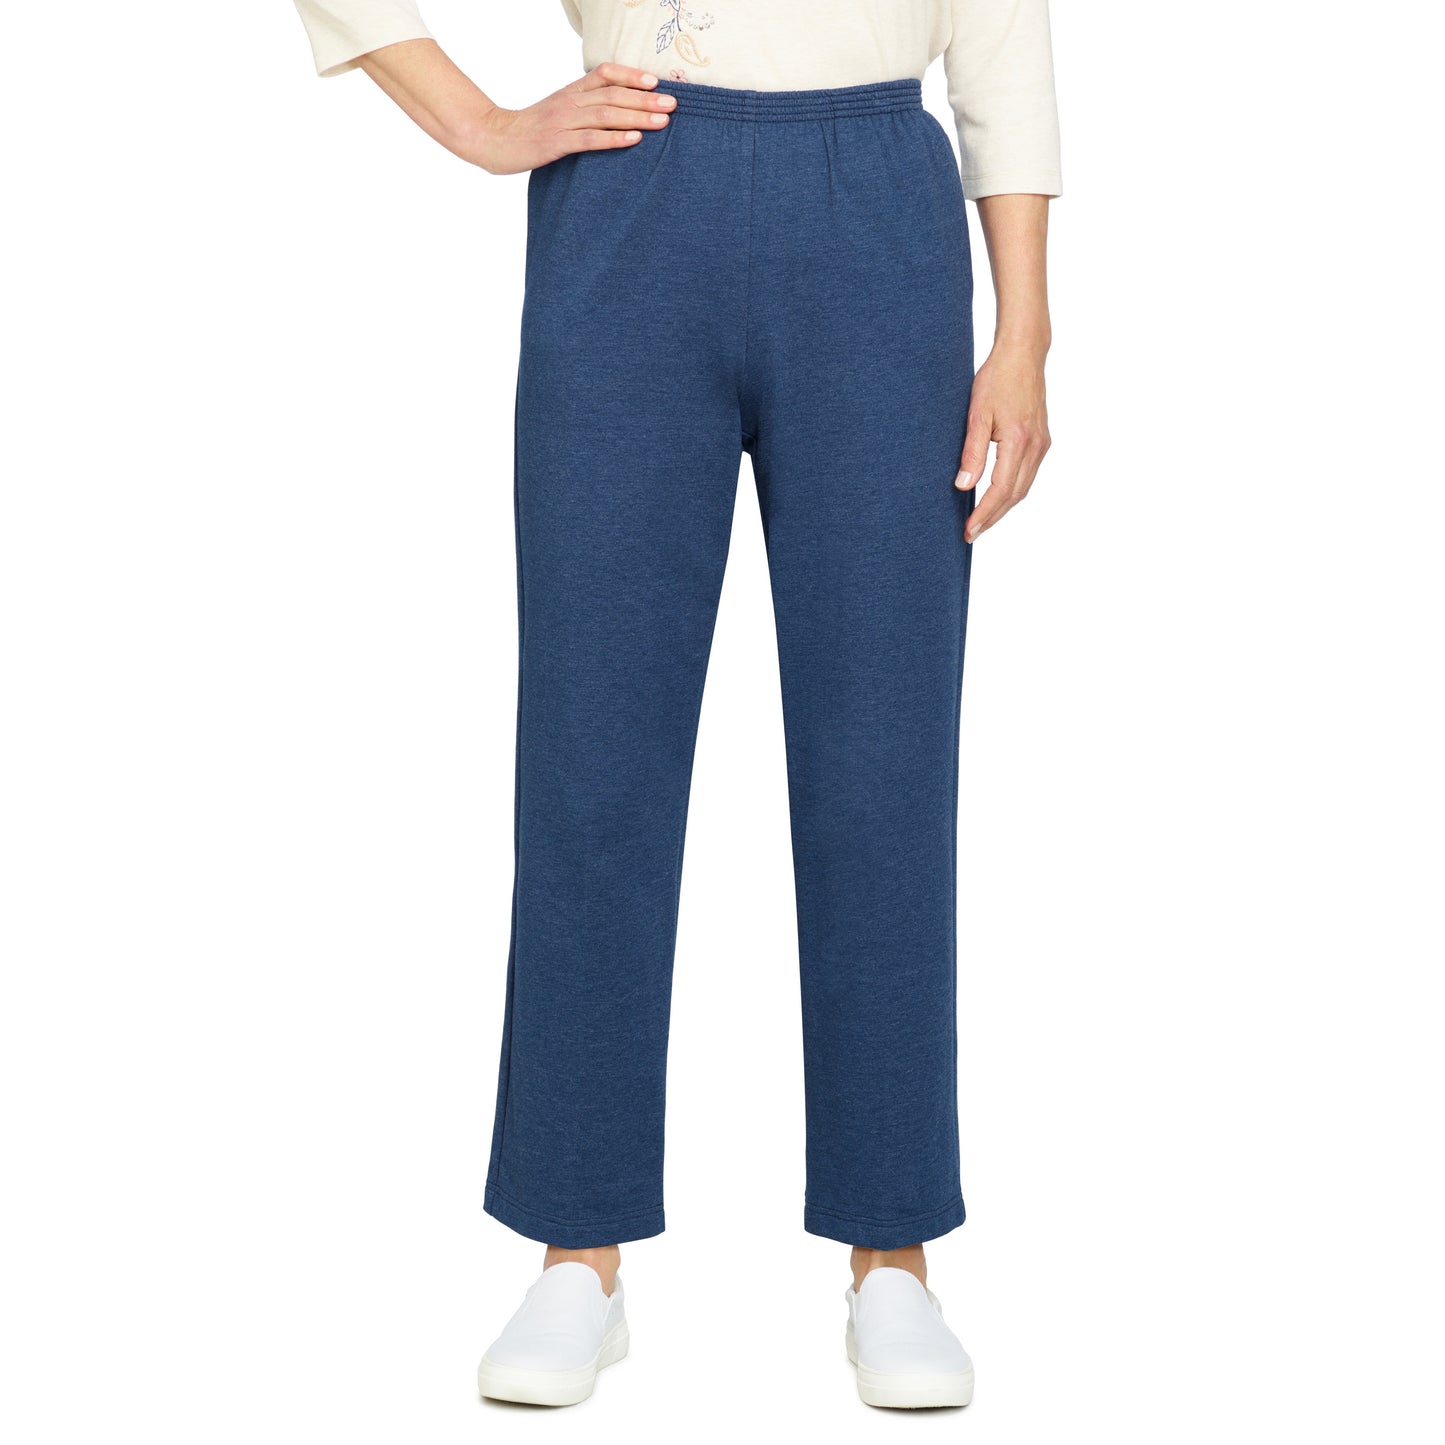 Relax And Enjoy French Terry Medium Length Pants Plus Size